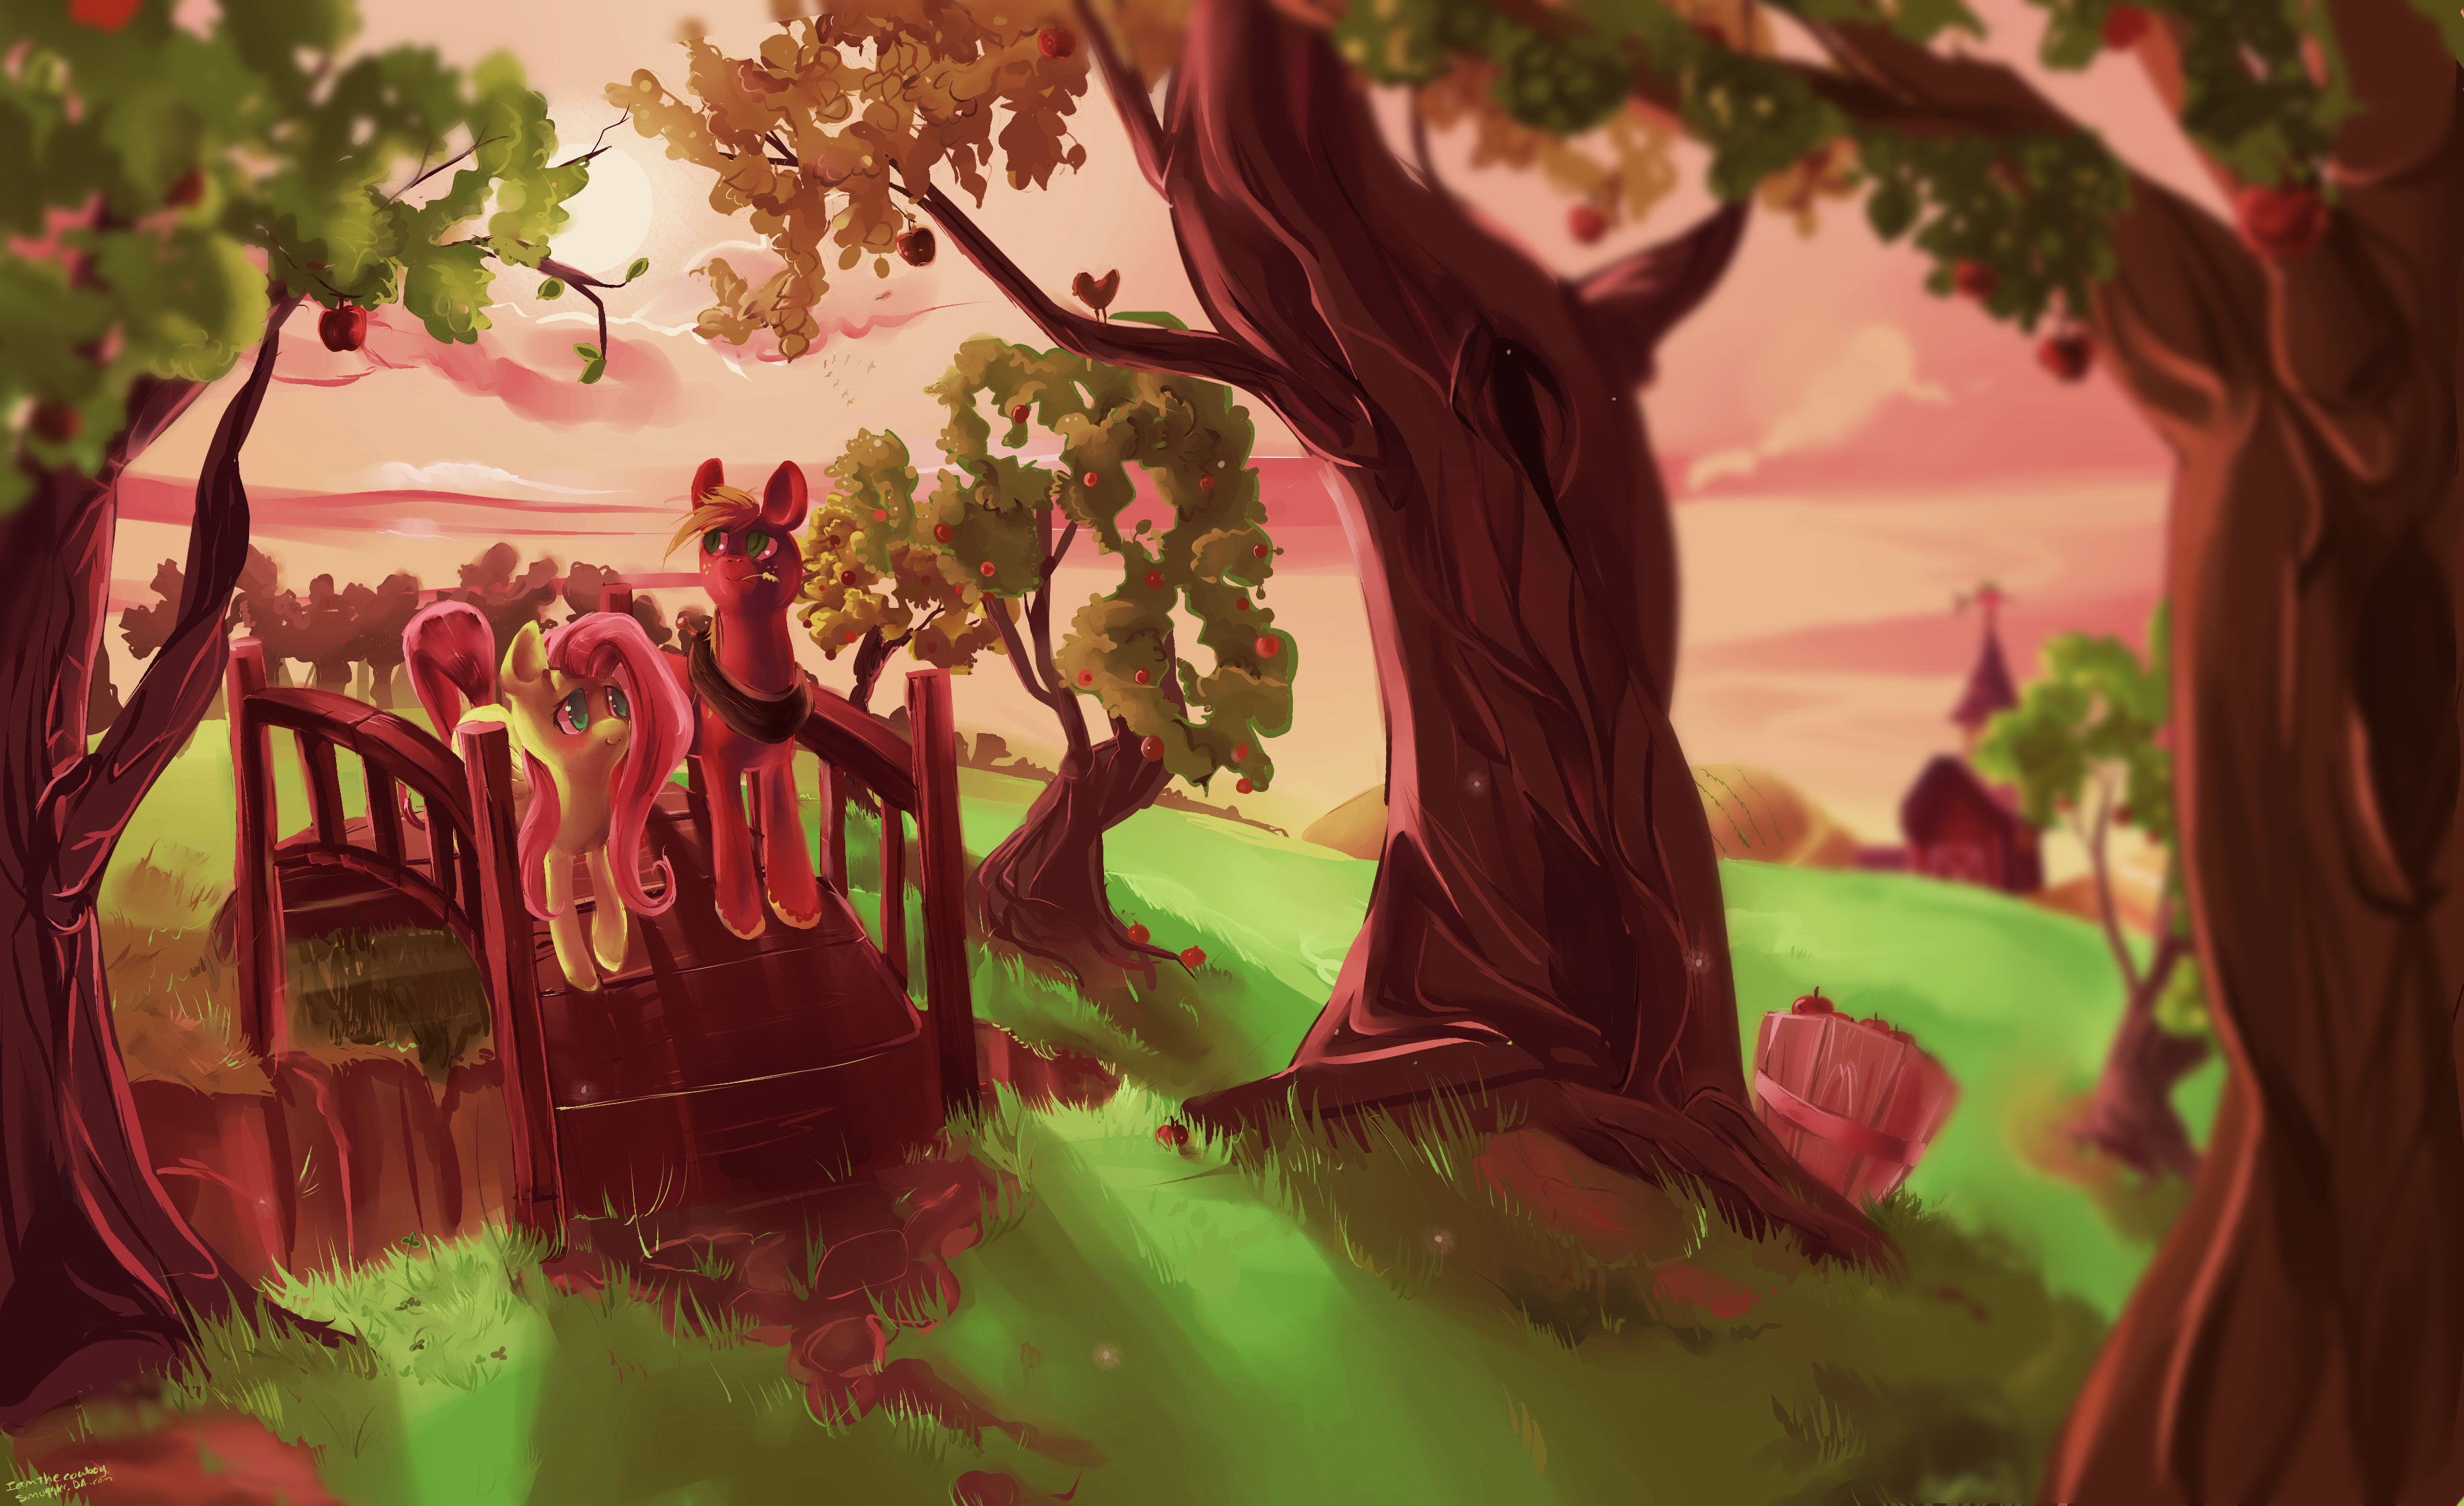 A Stroll Through the Orchard by The-Cowboy-Smuggler